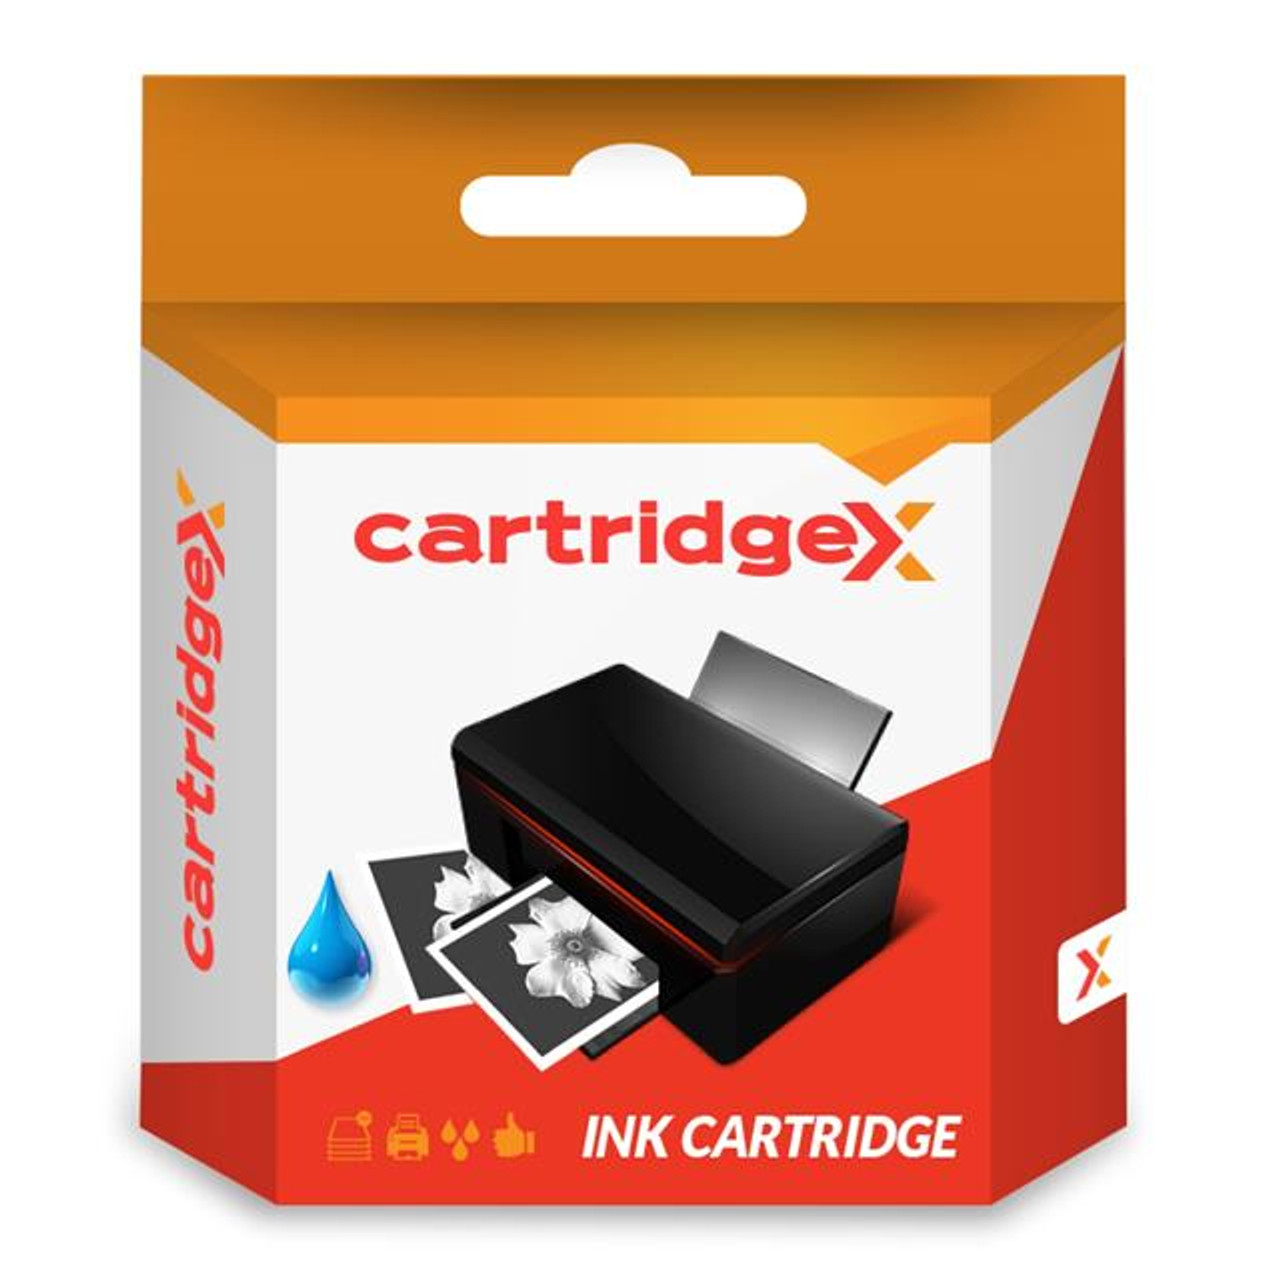 Compatible Cyan Ink Cartridge Compatible With Epson Stylus Pro 9800 7880 7800